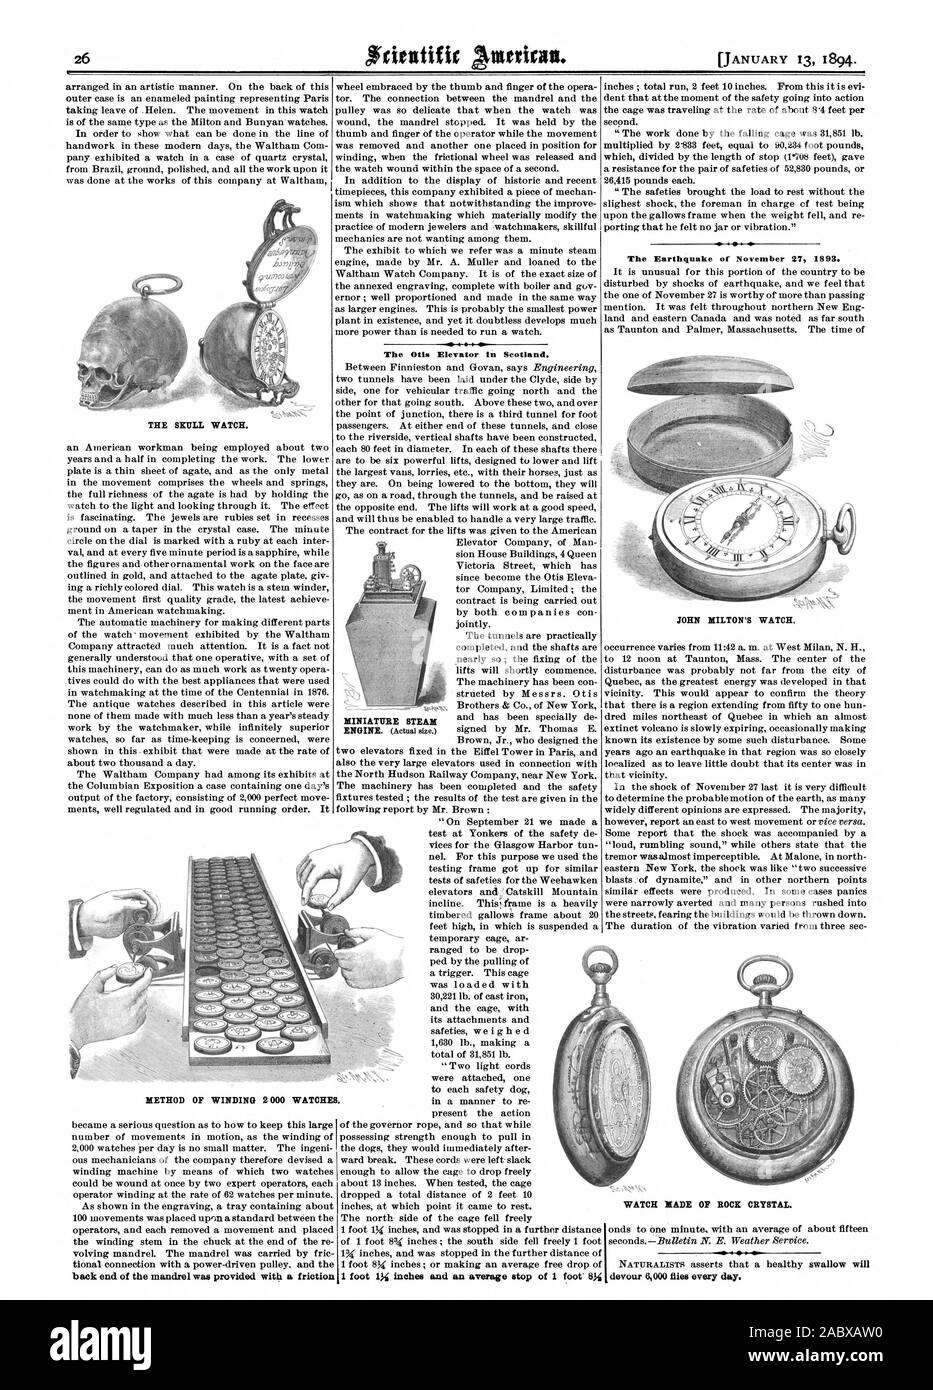 THE SKULL WATCH. back end of the mandrel was provided with a friction The Otis Elevator in Scotland. MINIATURE STEAM 1 foot inches and an average stop of 1 foot' The Earthquake of November 27 1893. JOHN MILTON'S WATCH. WATCH MADE OF ROCK CRYSTAL devour 6000 flies every day. METHOD OF WINDING 2 000 WATCHES., scientific american, 1894-01-13 Stock Photo